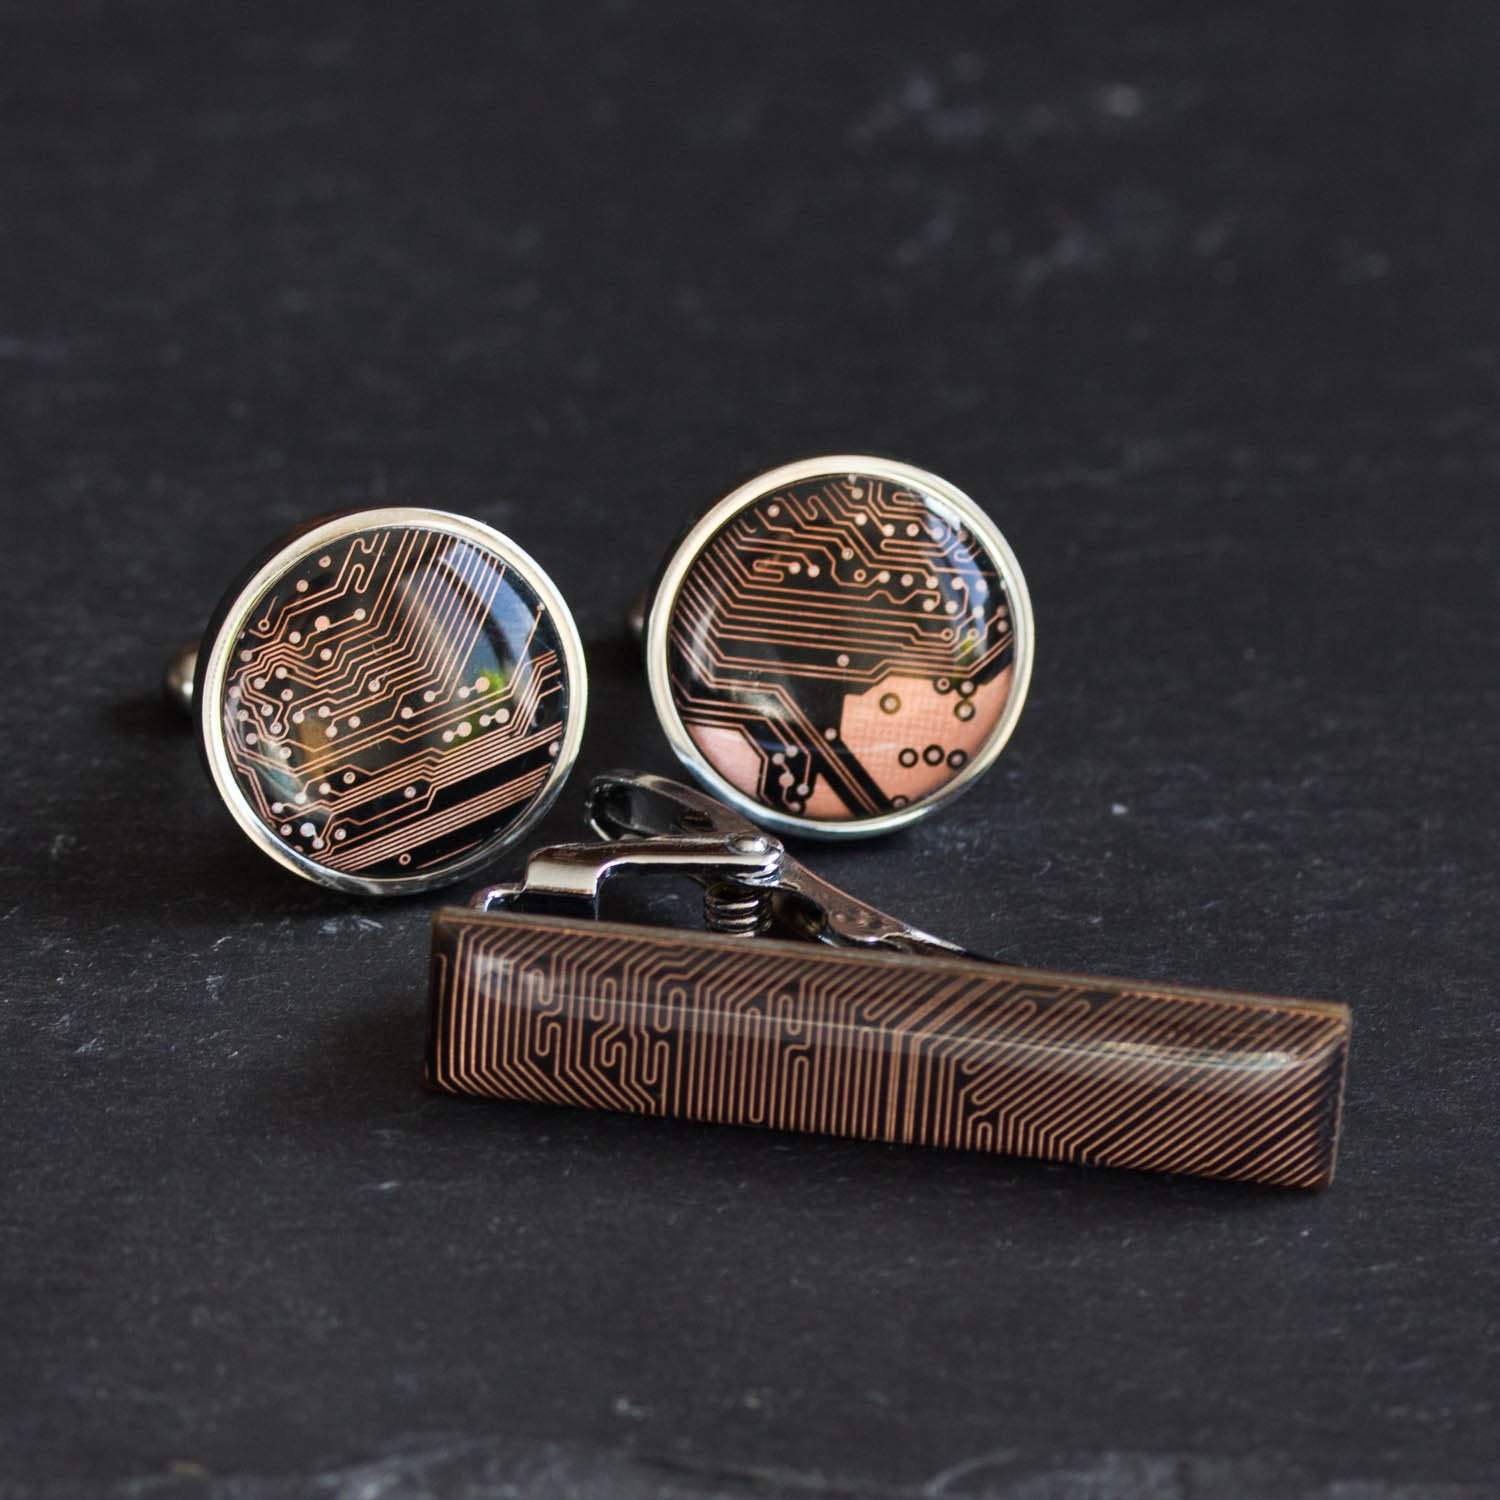 Black and Copper Cufflinks and tie clip set 